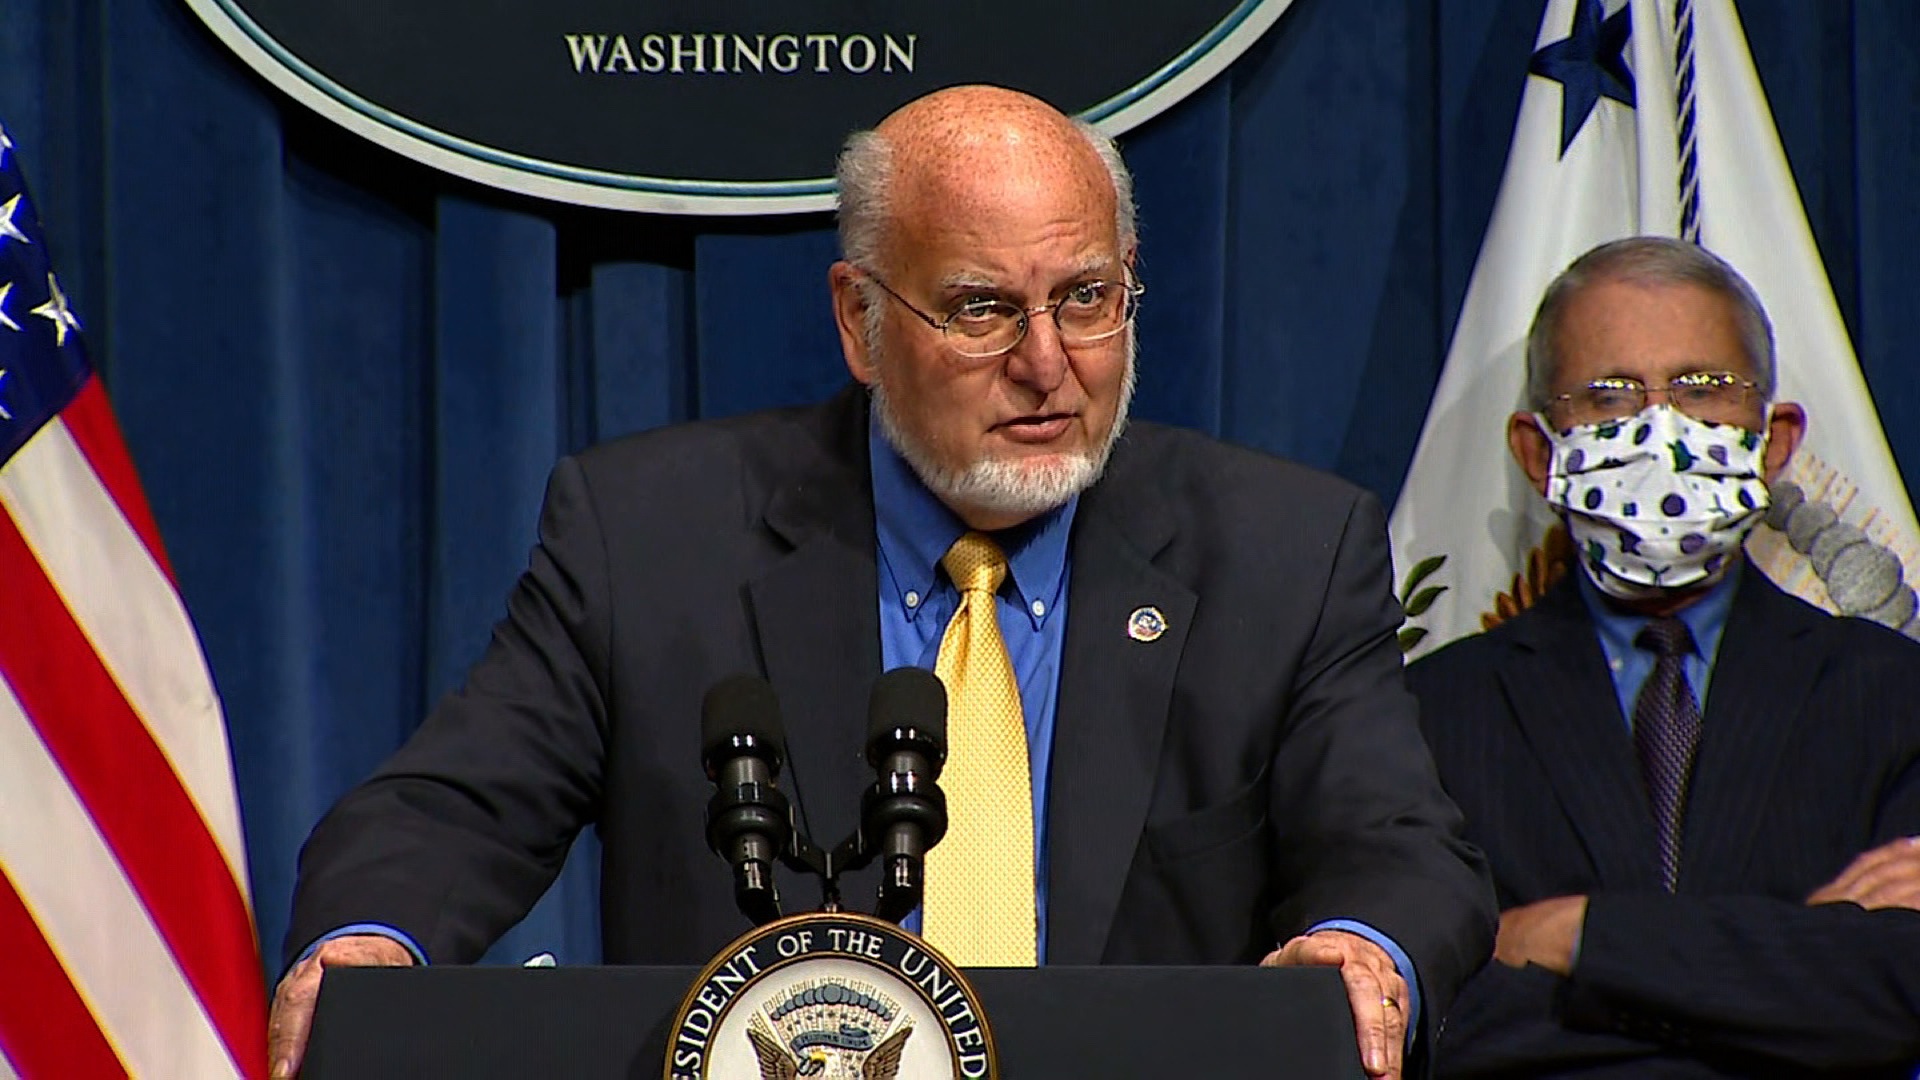 Dr. Robert Redfield, the head of the Centers for Disease Control and Prevention speaks at the White House in Washington, DC on June 26.